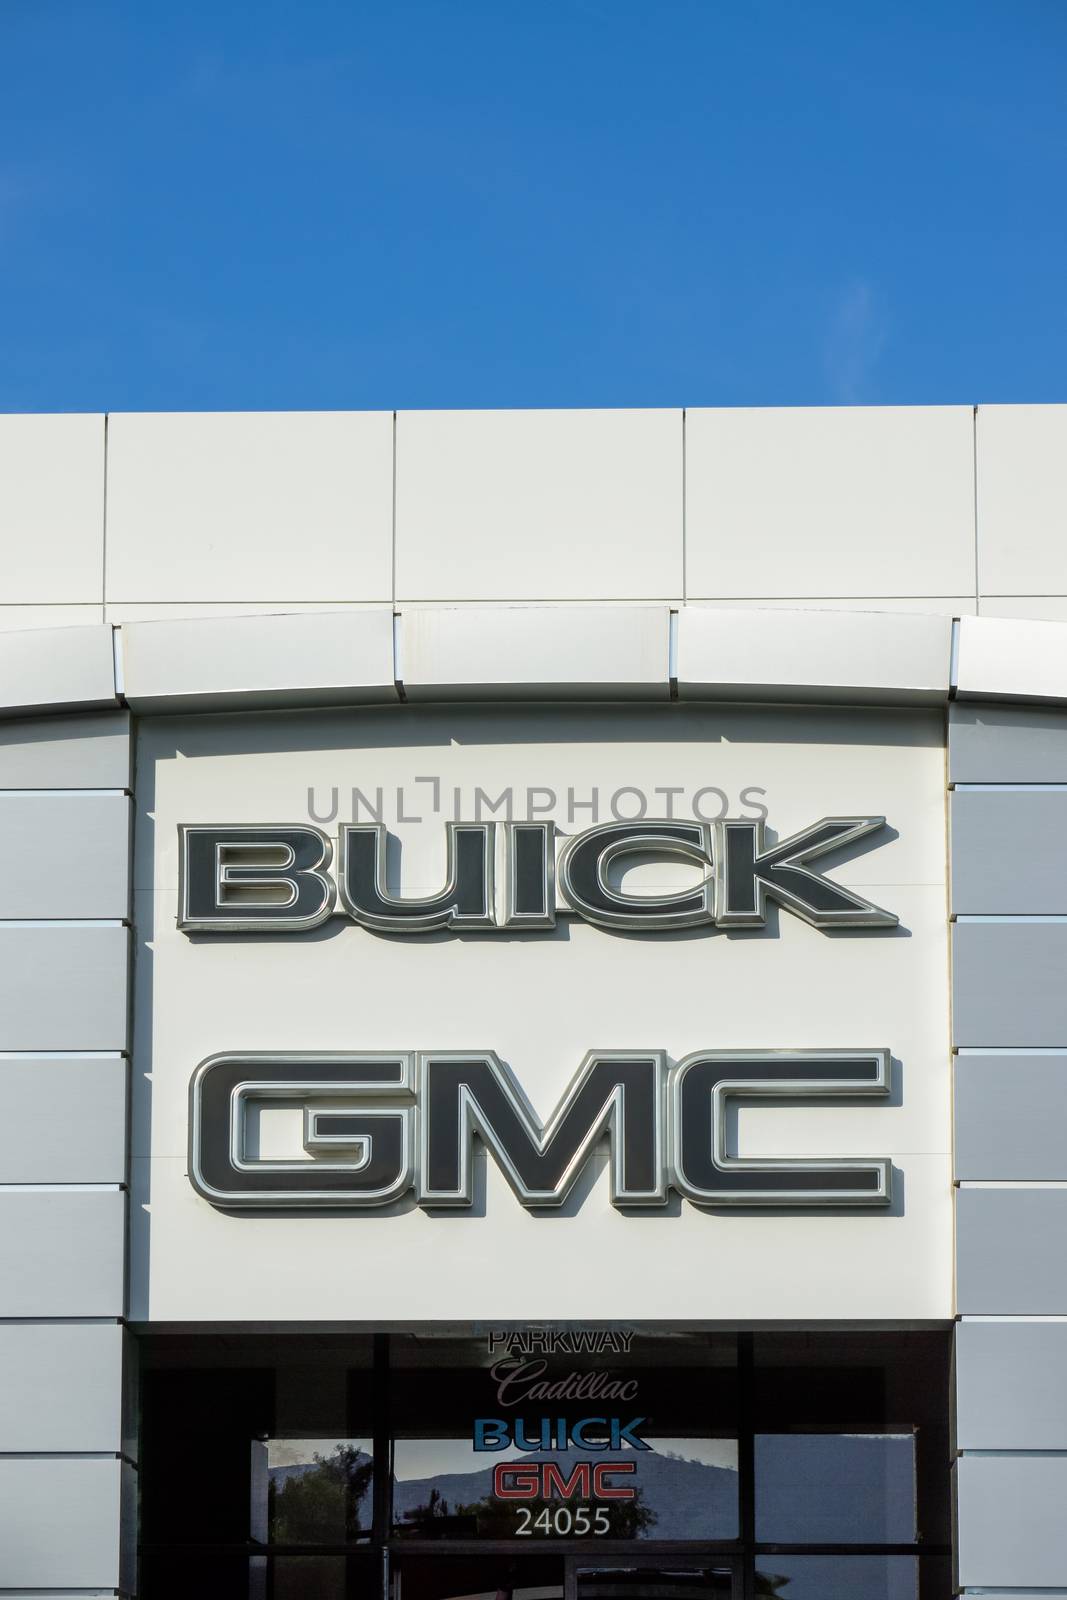 Buick GMC Automobile Dealership Exterior and Logo. by wolterk